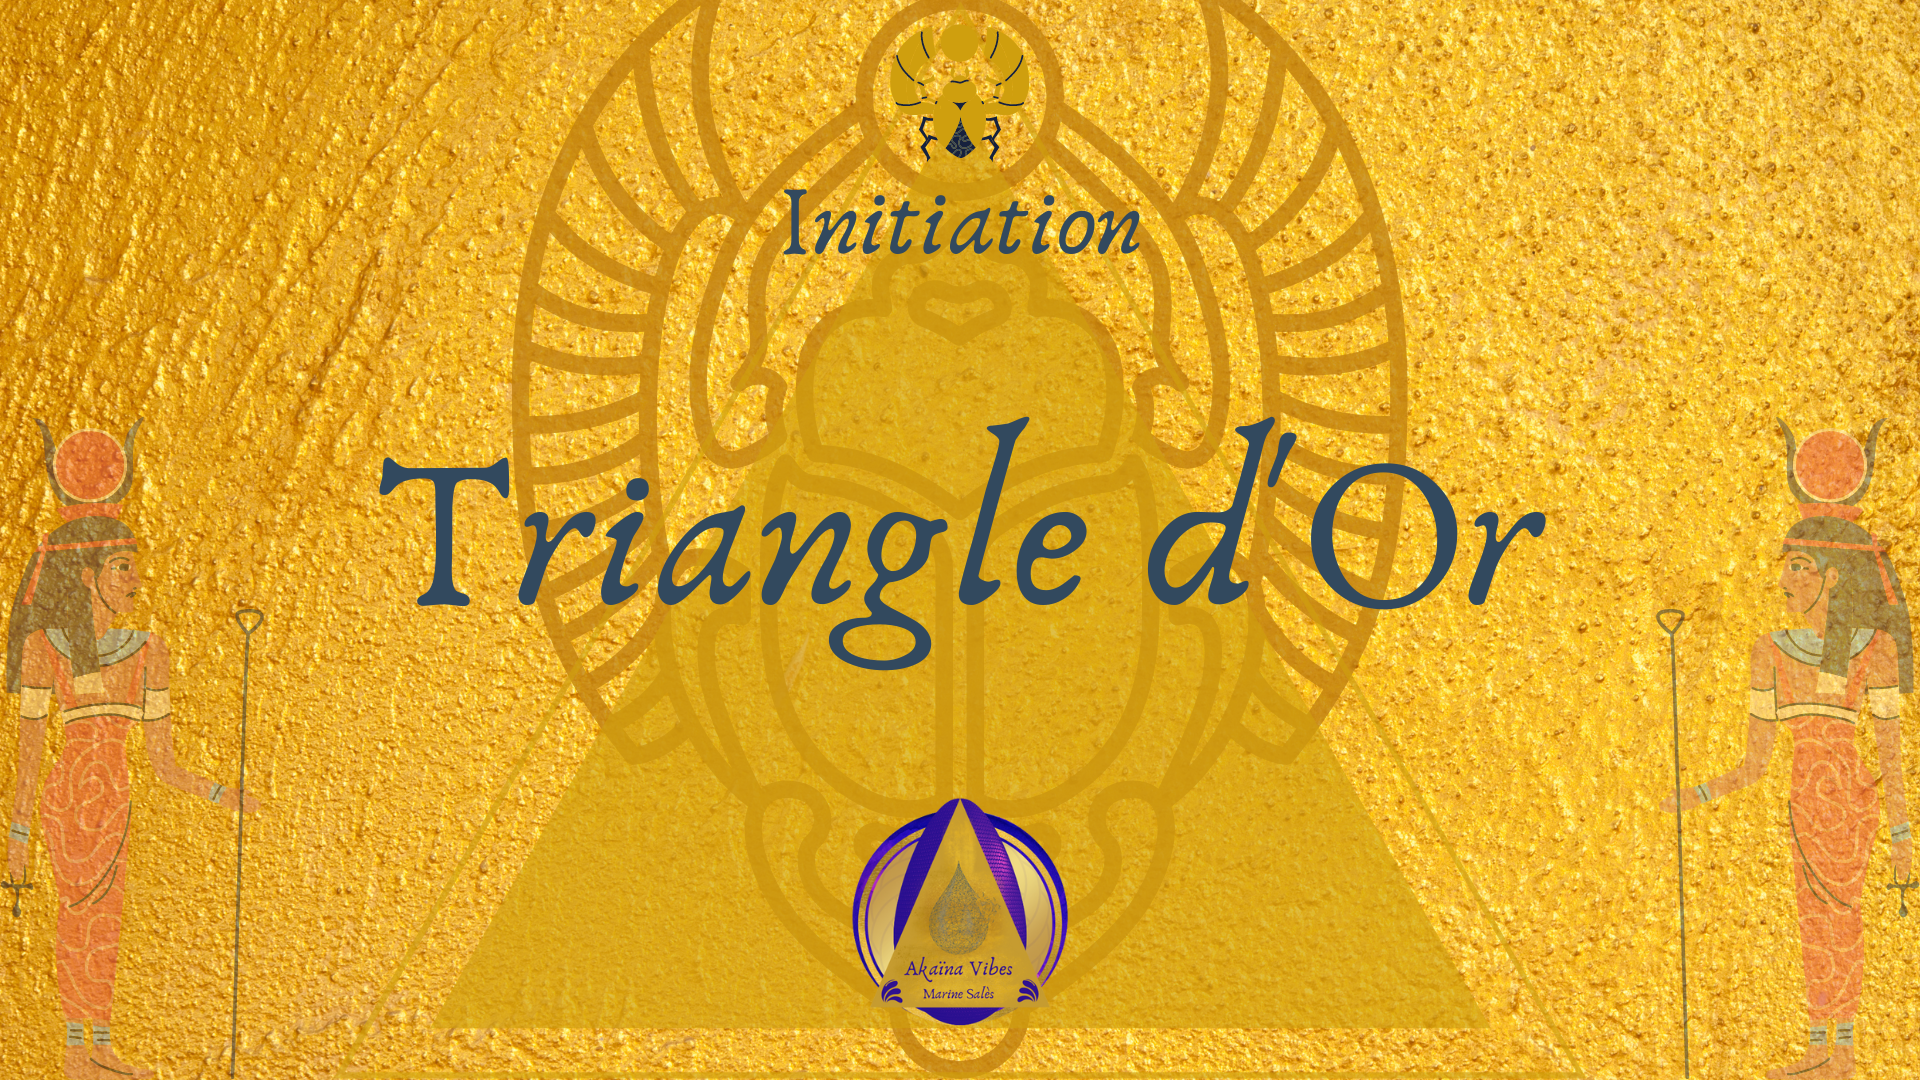 initiation-coeur-or-triangle-dore-temple-isis-dragons